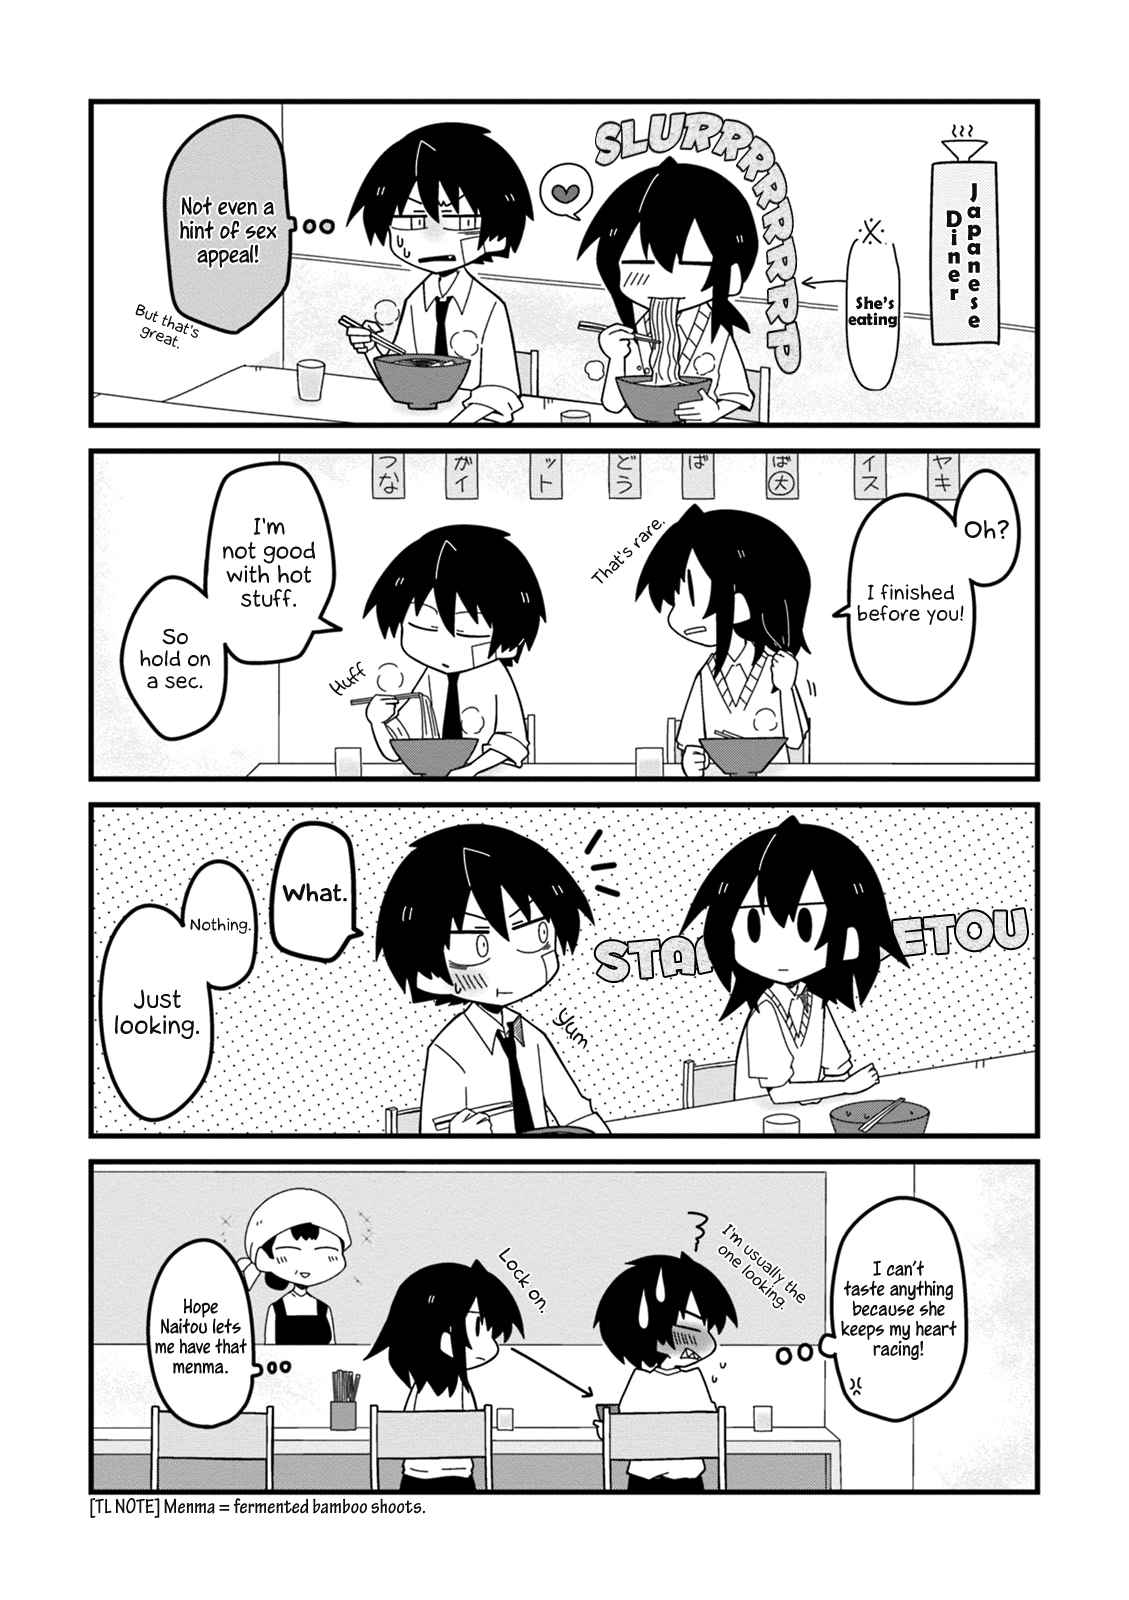 Why Naitou Vol. 2 Ch. 24.1 Extra 1